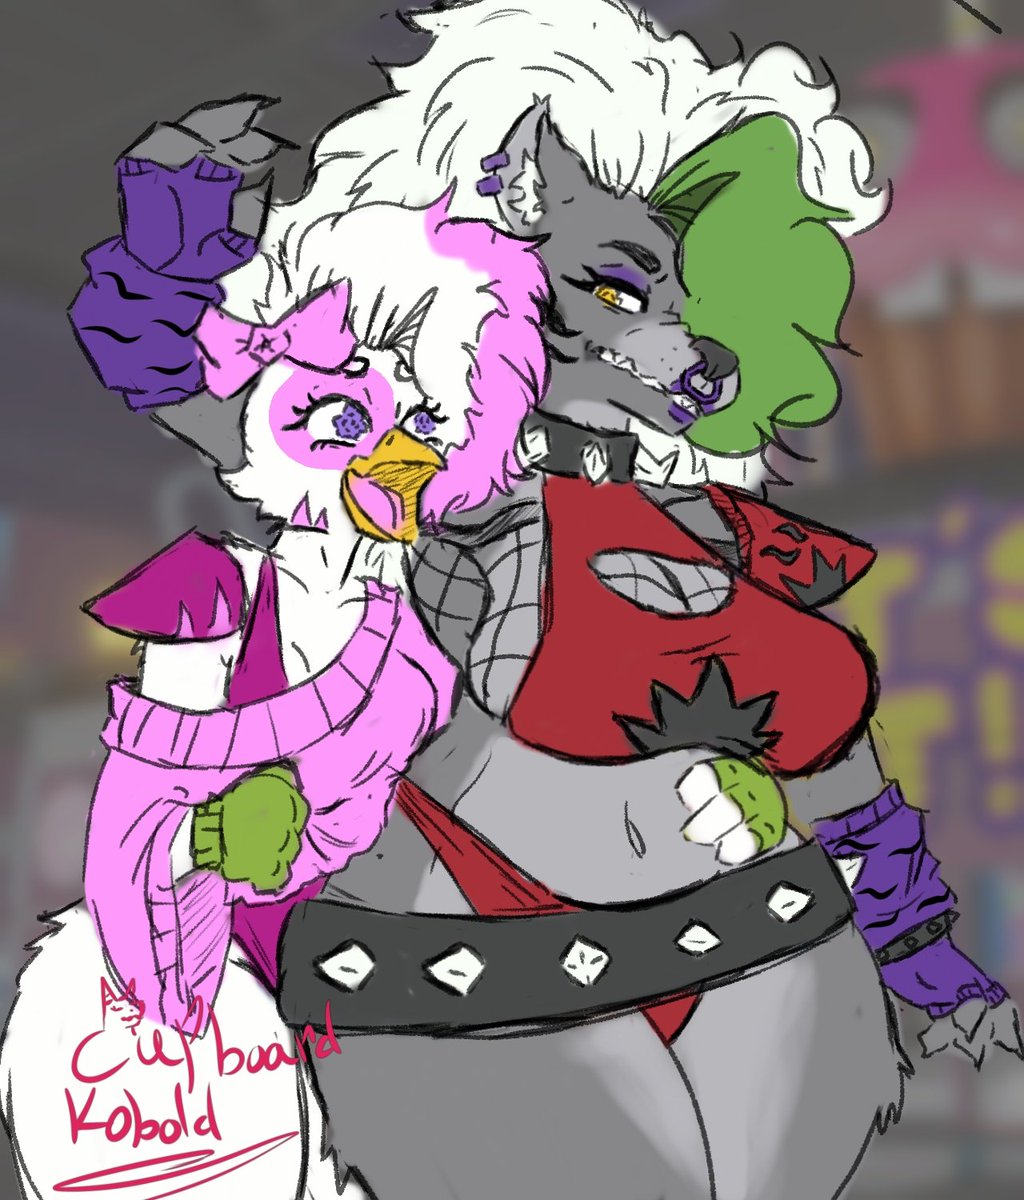 'Let's go to the kitchen and see how much toppings the chefs will let me add!!' 

#Fnaf #fivenightsatfreddys #SecurityBreach #RoxanneWolf #GlamrockChica